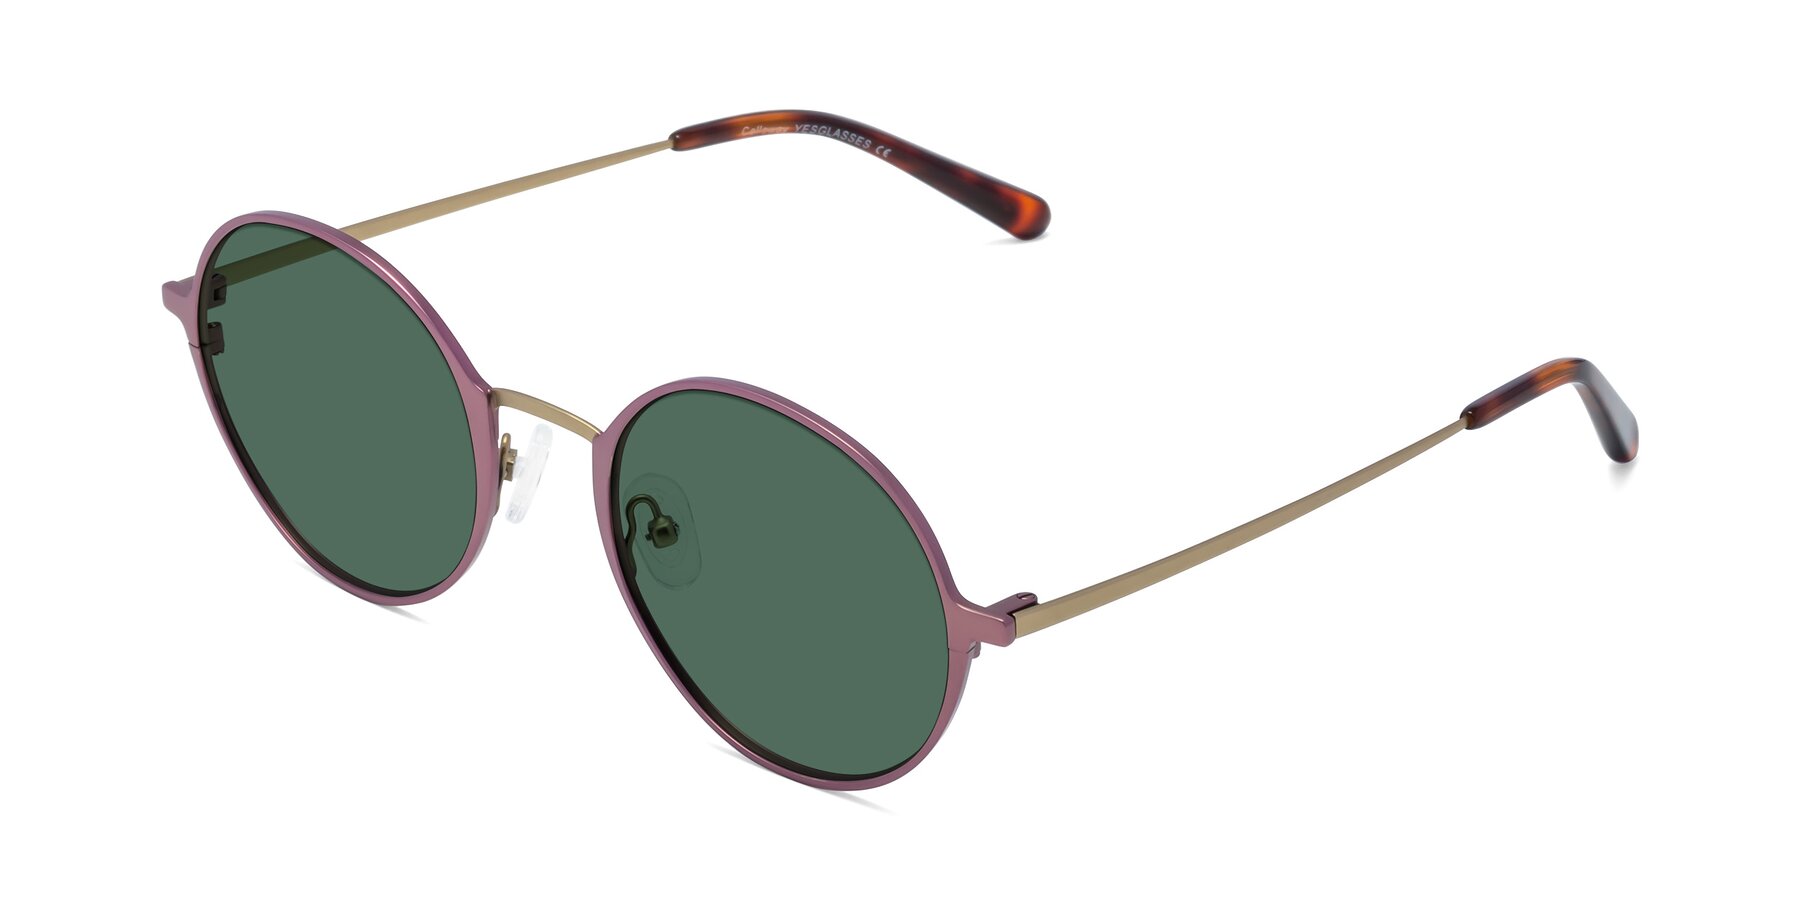 Angle of Calloway in Voliet-Copper with Green Polarized Lenses